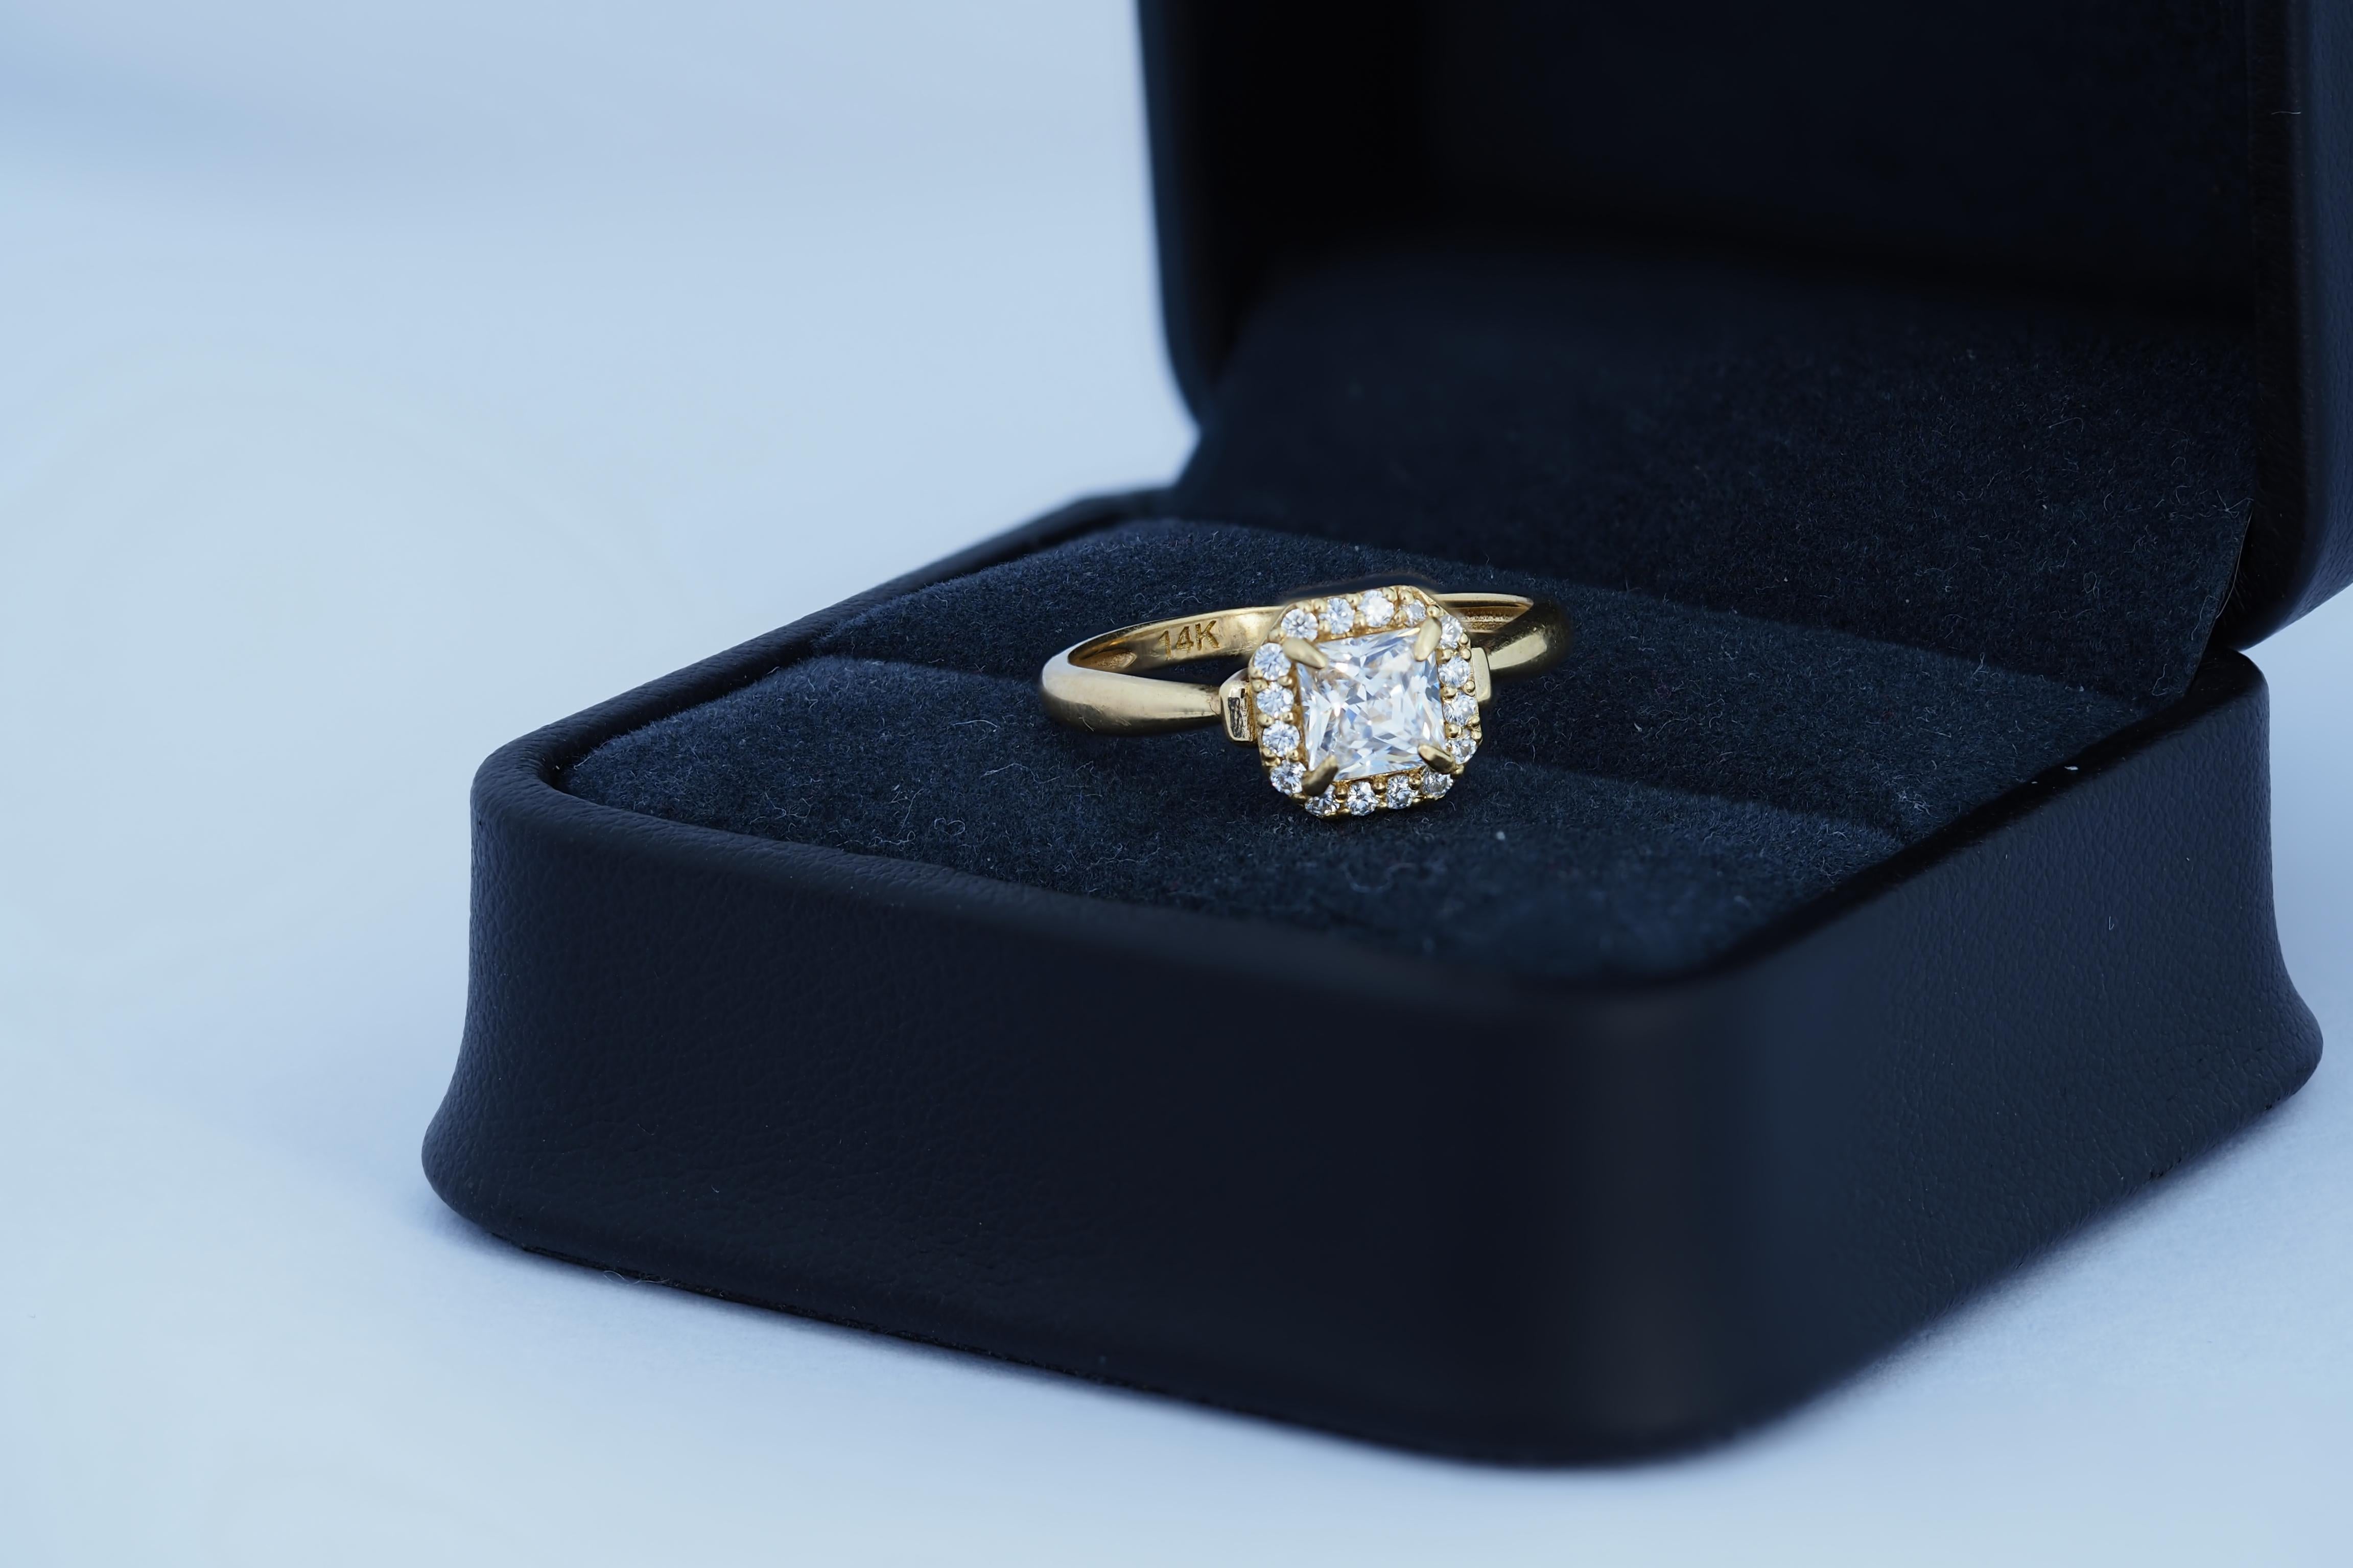 For Sale:  1 ct Princess cut moissanite 14k gold ring.  5